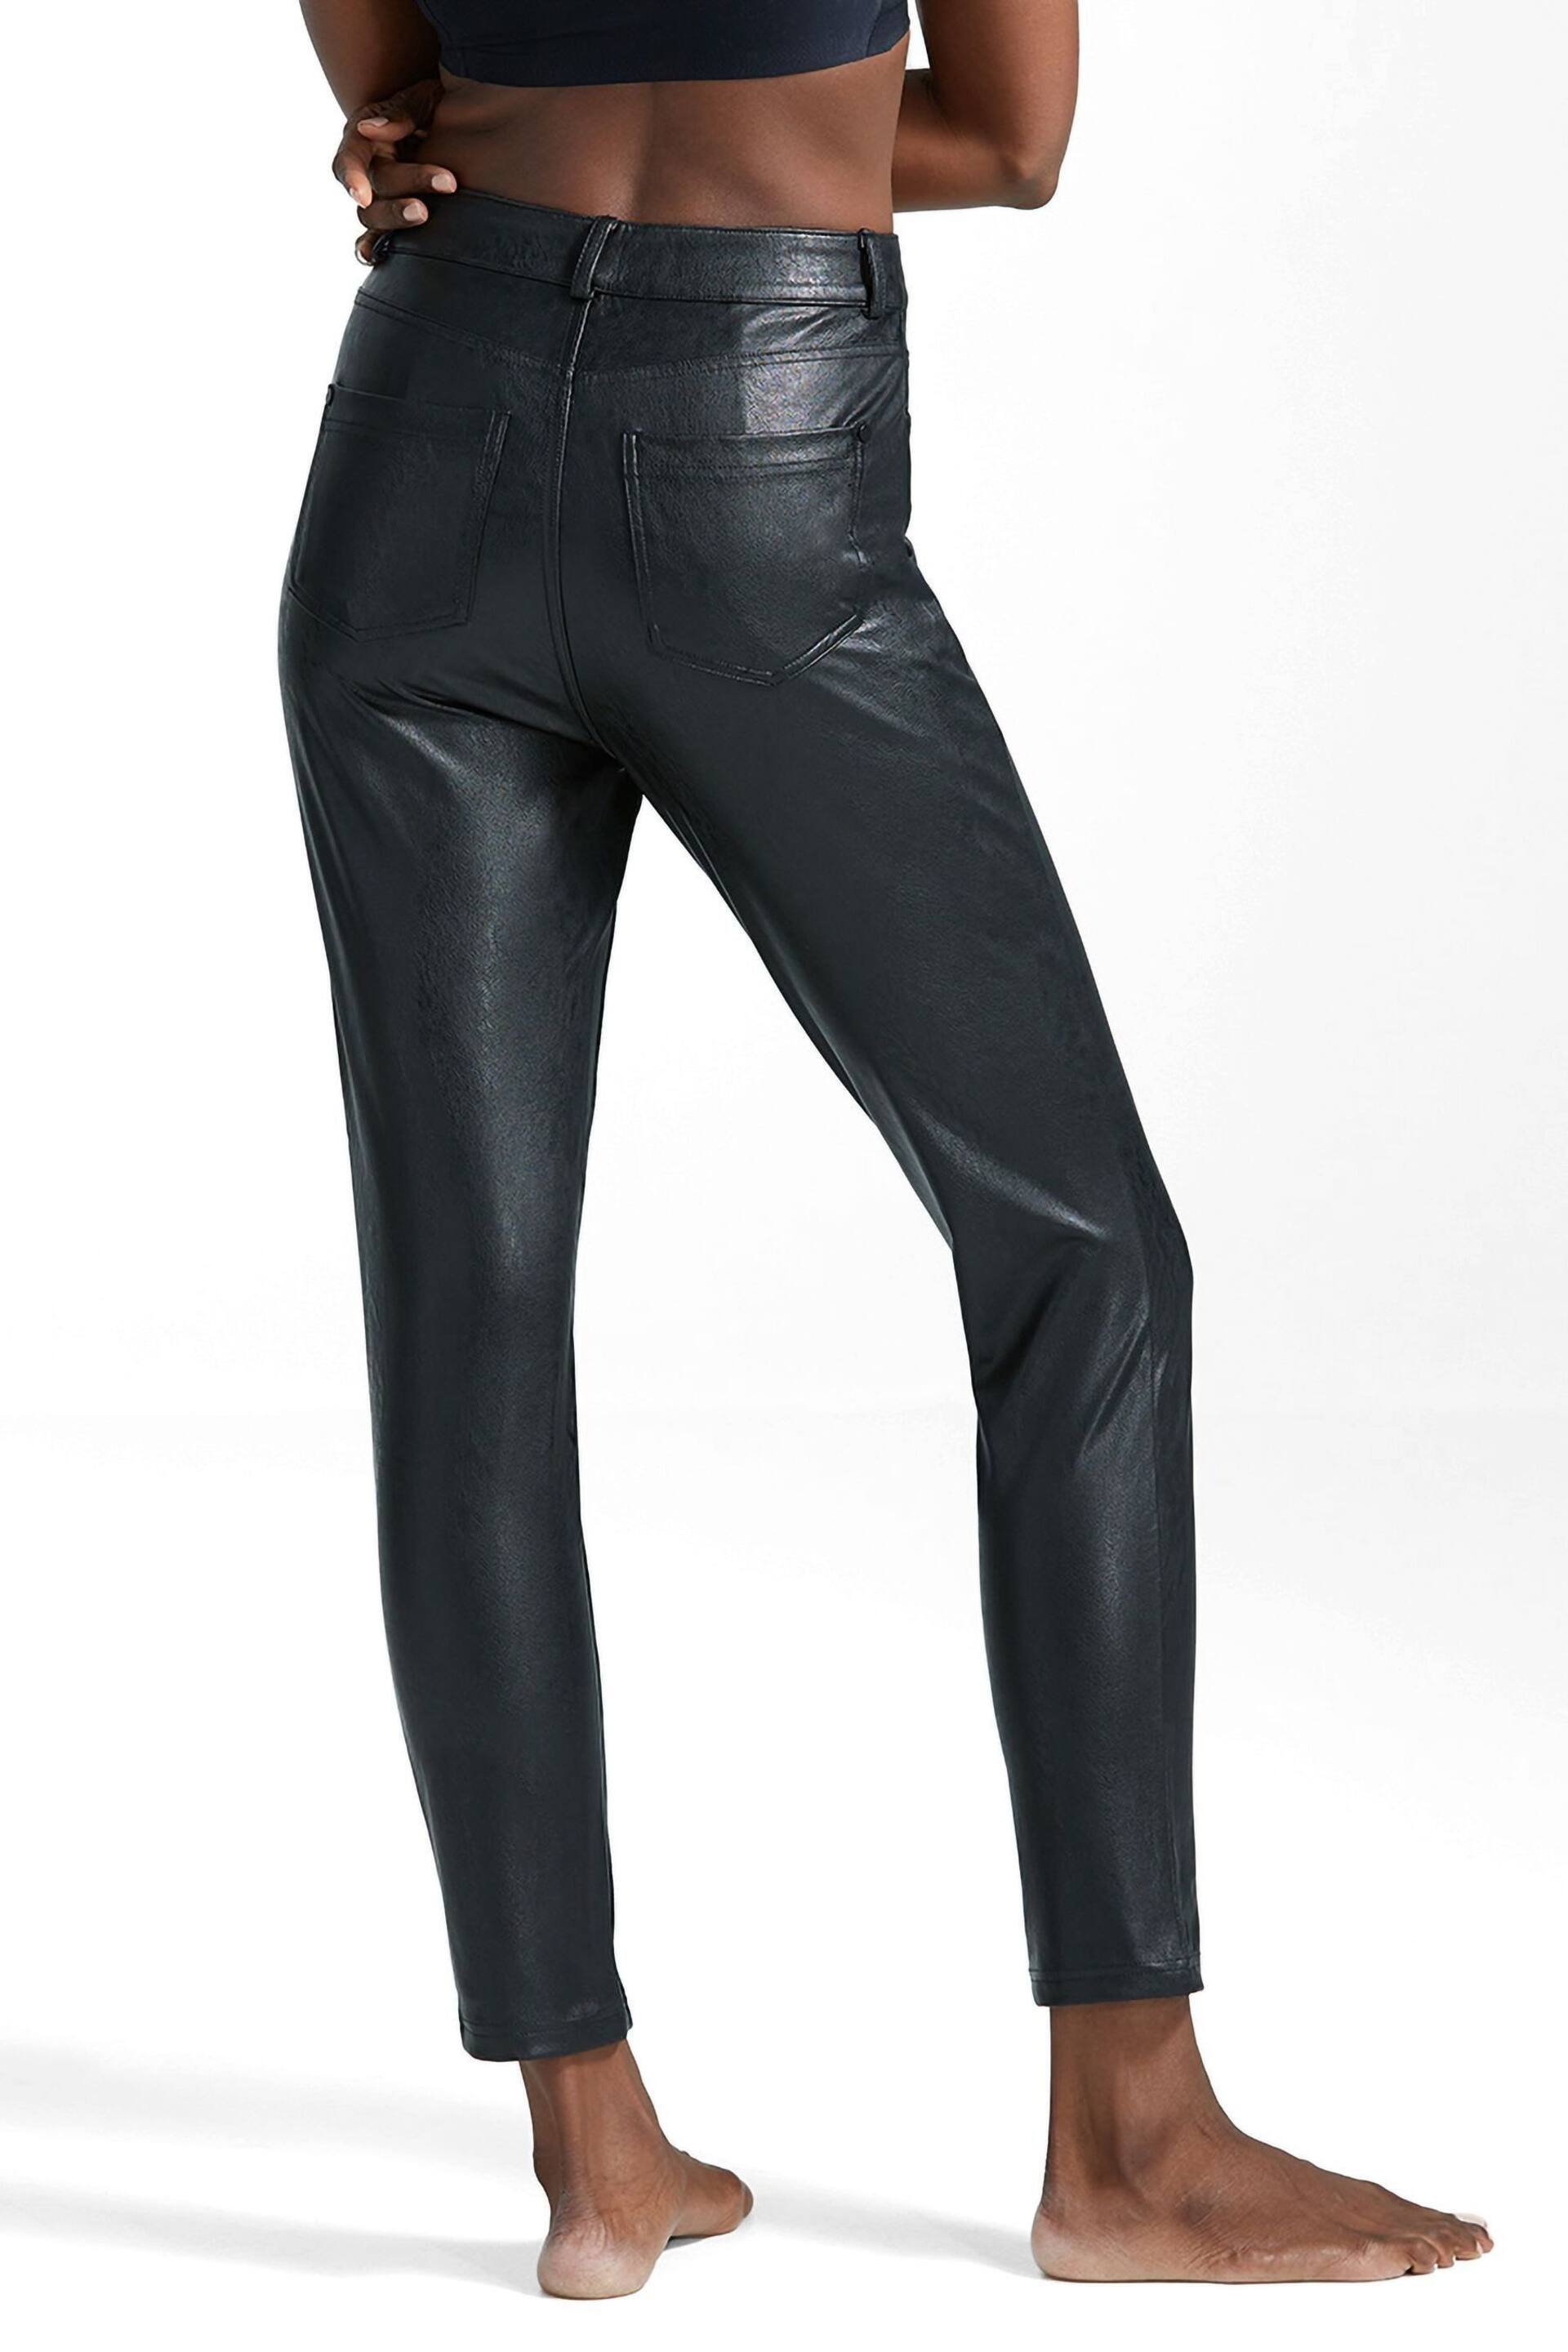 Commando 5 Pocket Faux Leather Trousers - Image 3 of 4